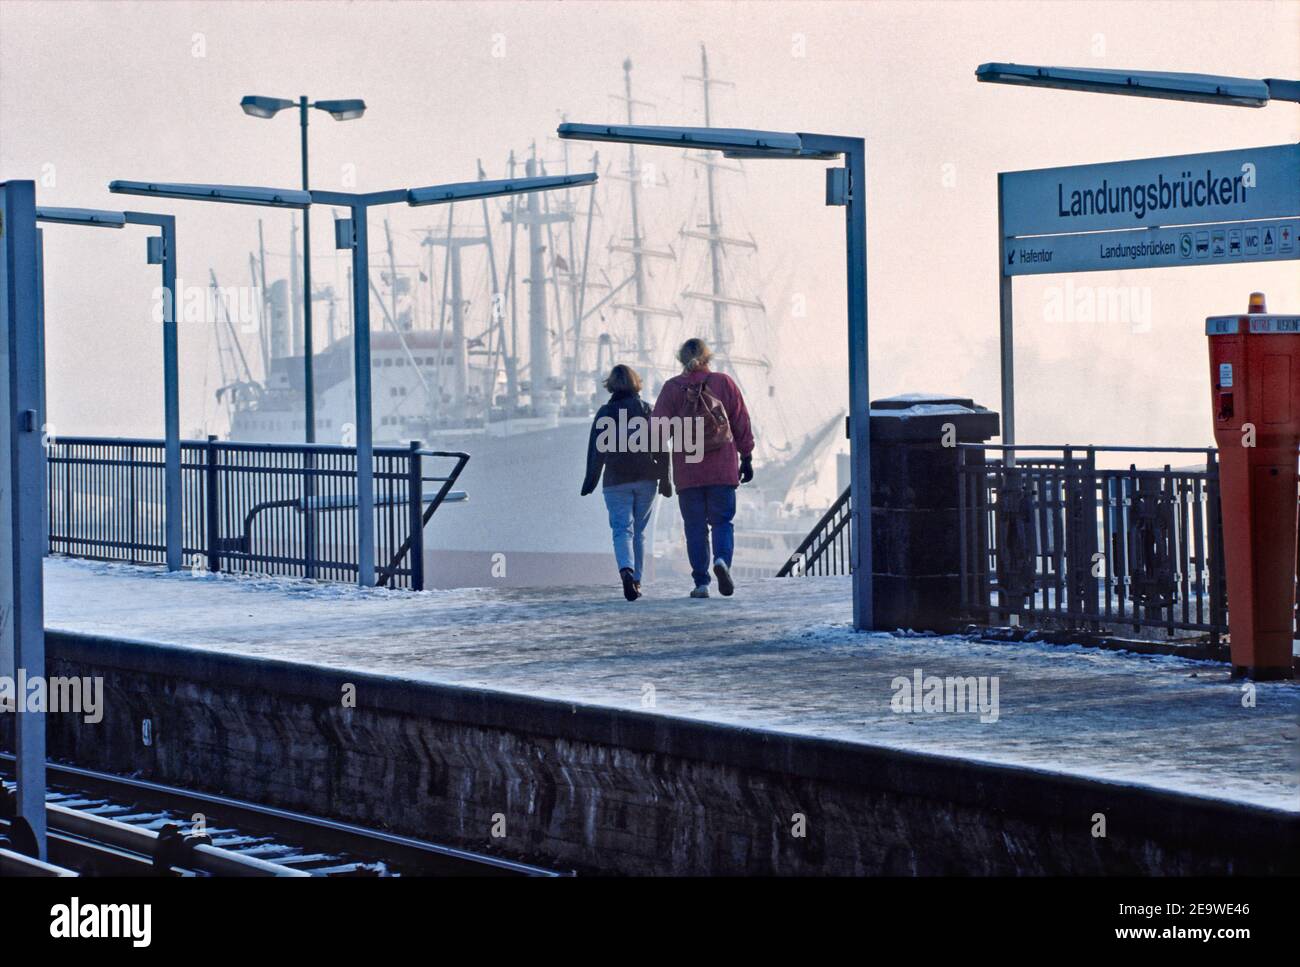 Young couple leaving the platform of S-train station Landungsbrücken in Hamburg, Germany. Stock Photo